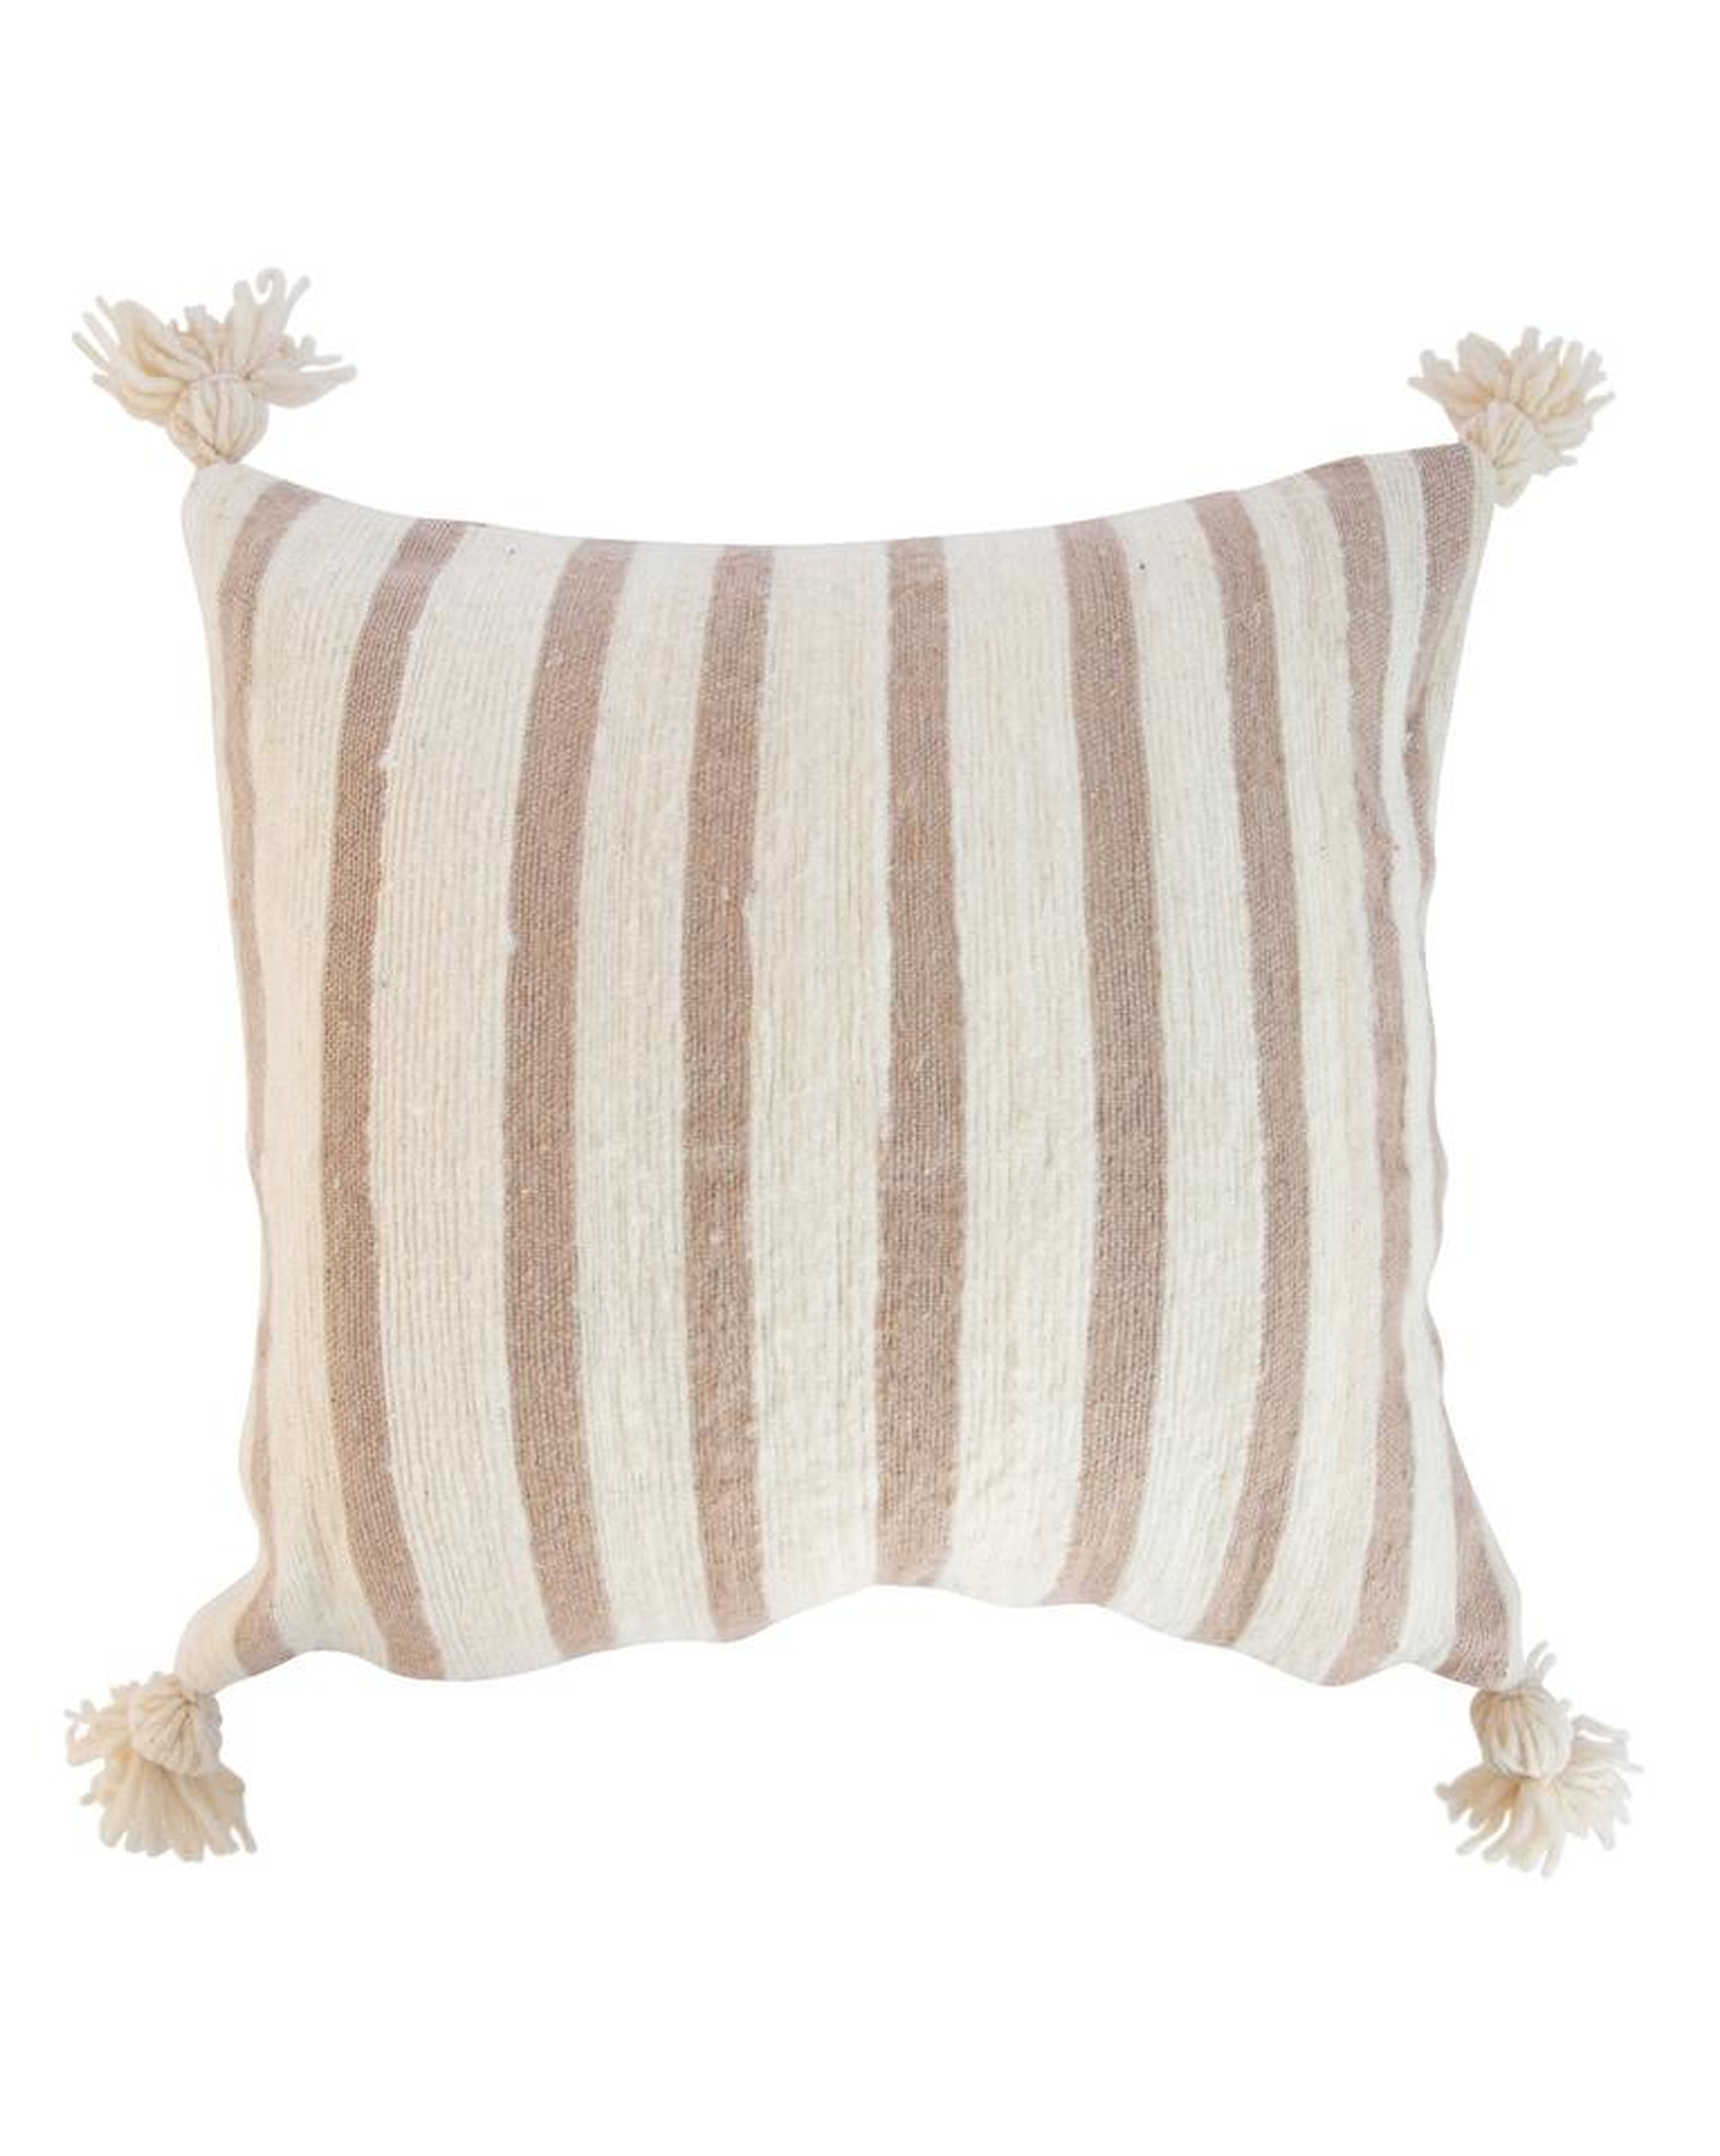 Janna Pillow with insert - McGee & Co.